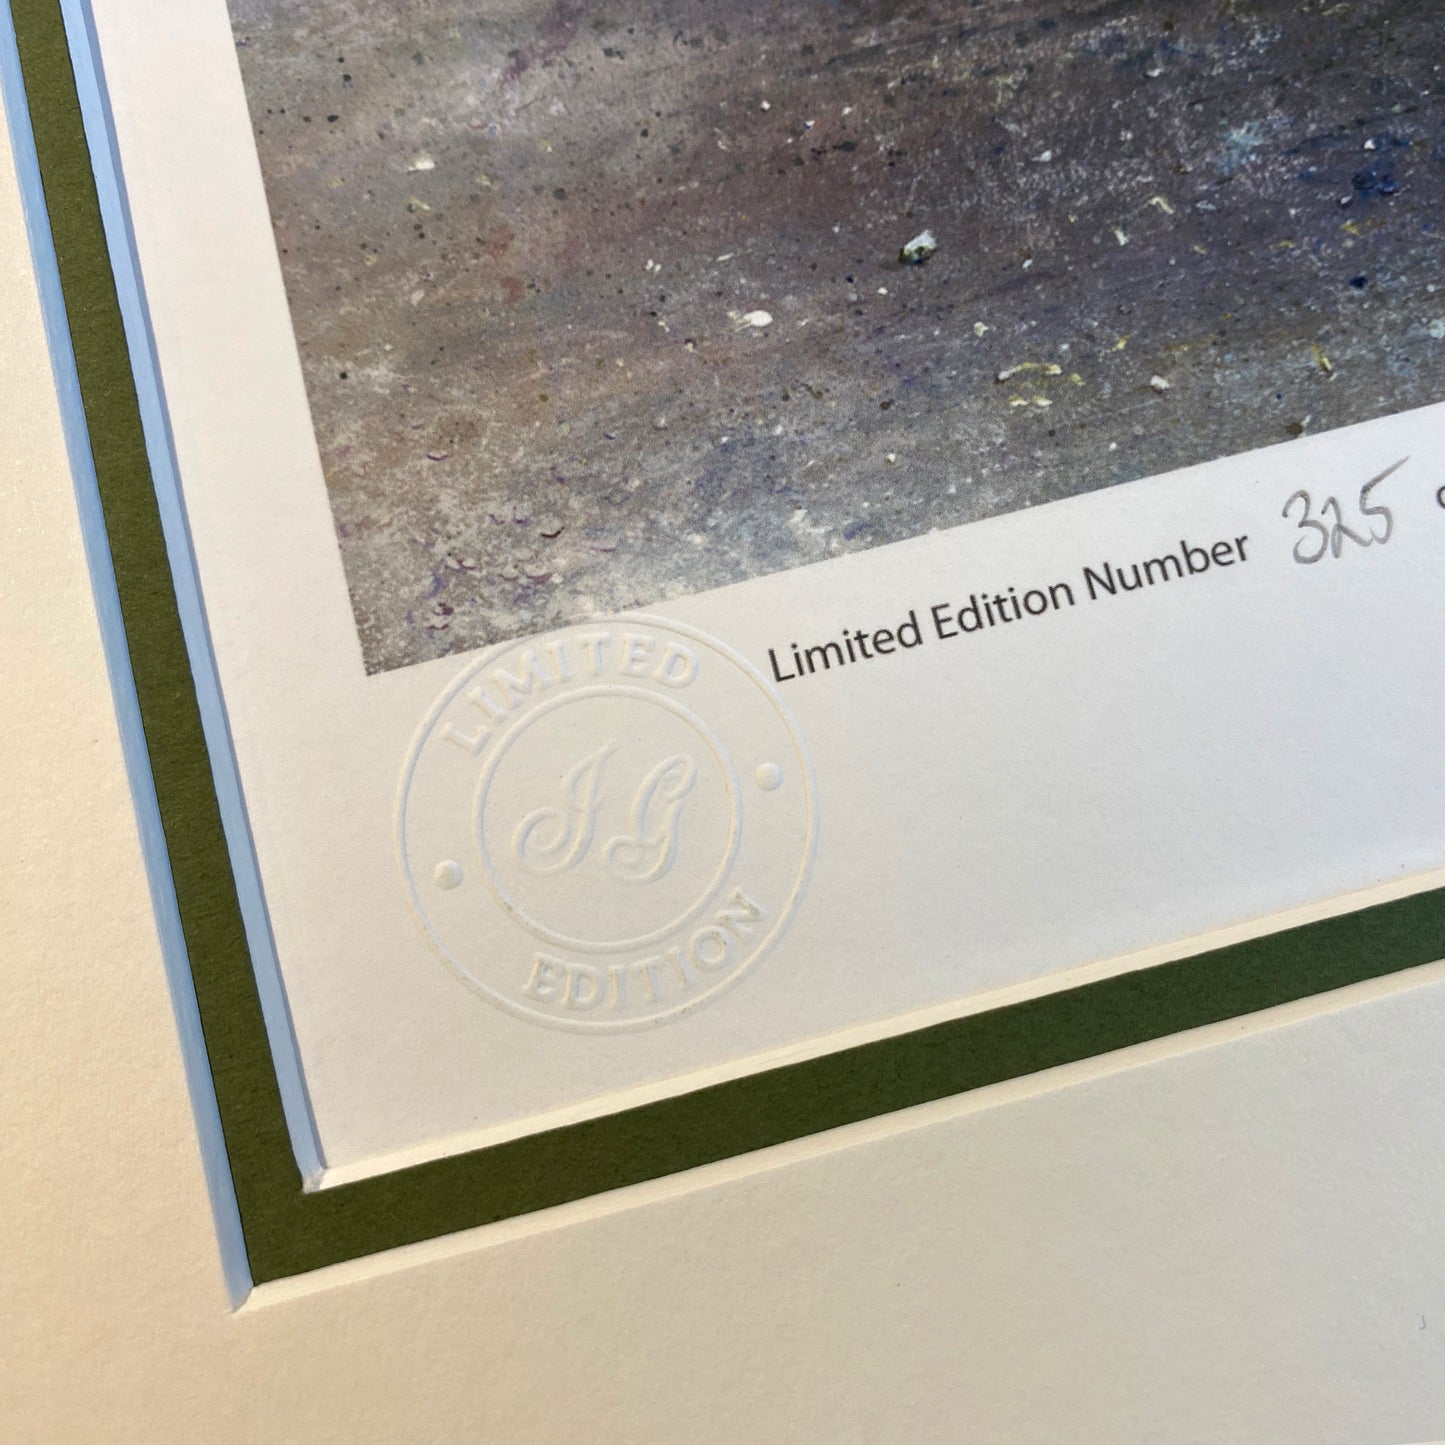 embossed limited edition stamp on a railway print